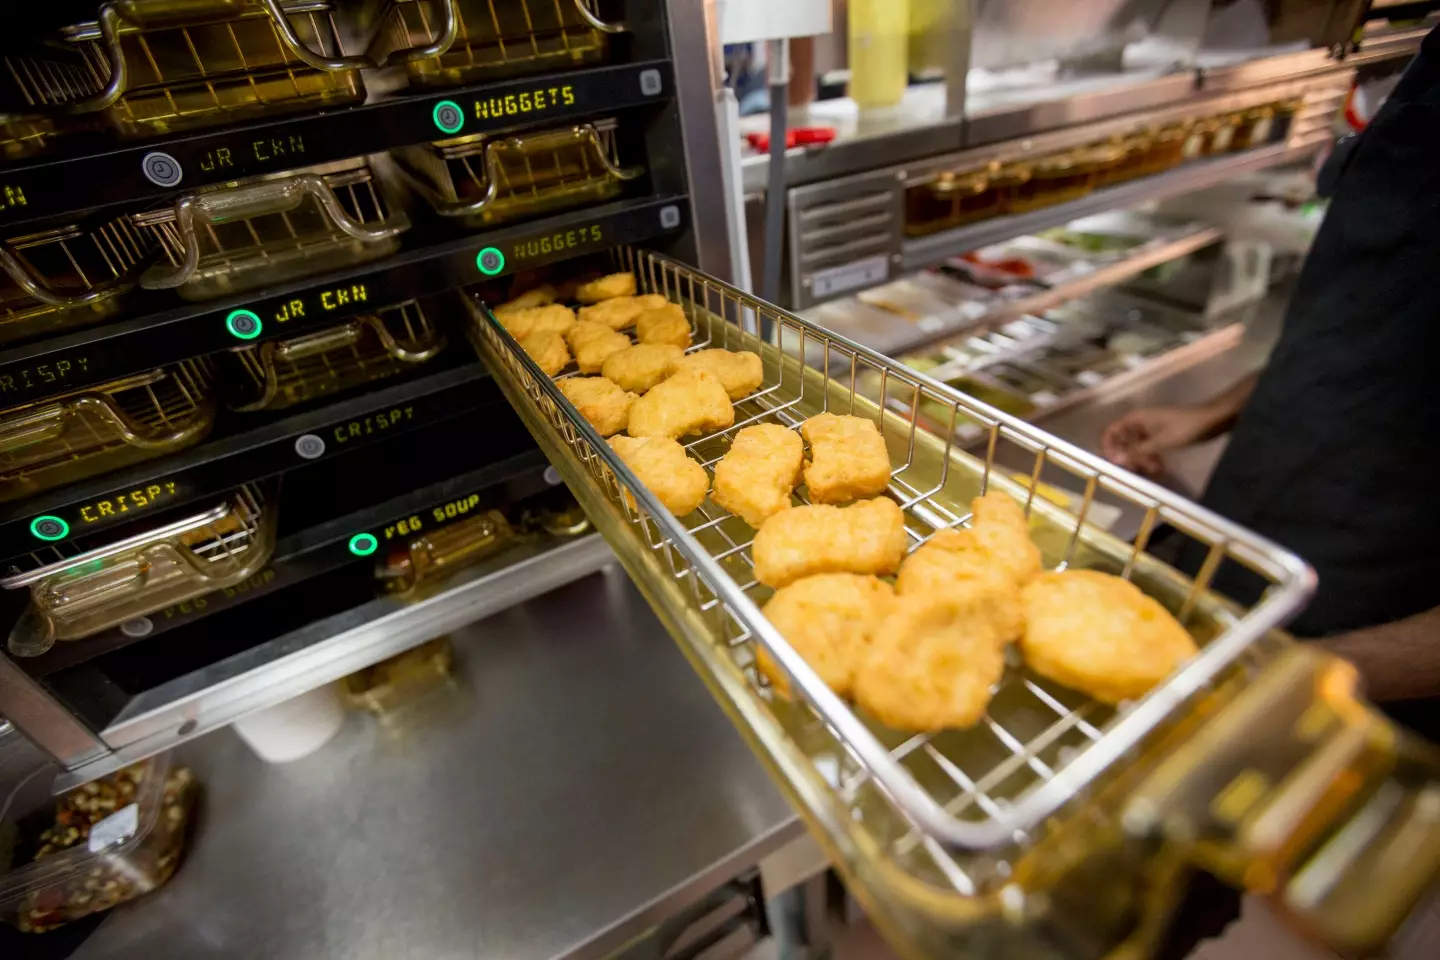 According to McDonald's lawyers, McNuggets are cooked at 160 degrees.